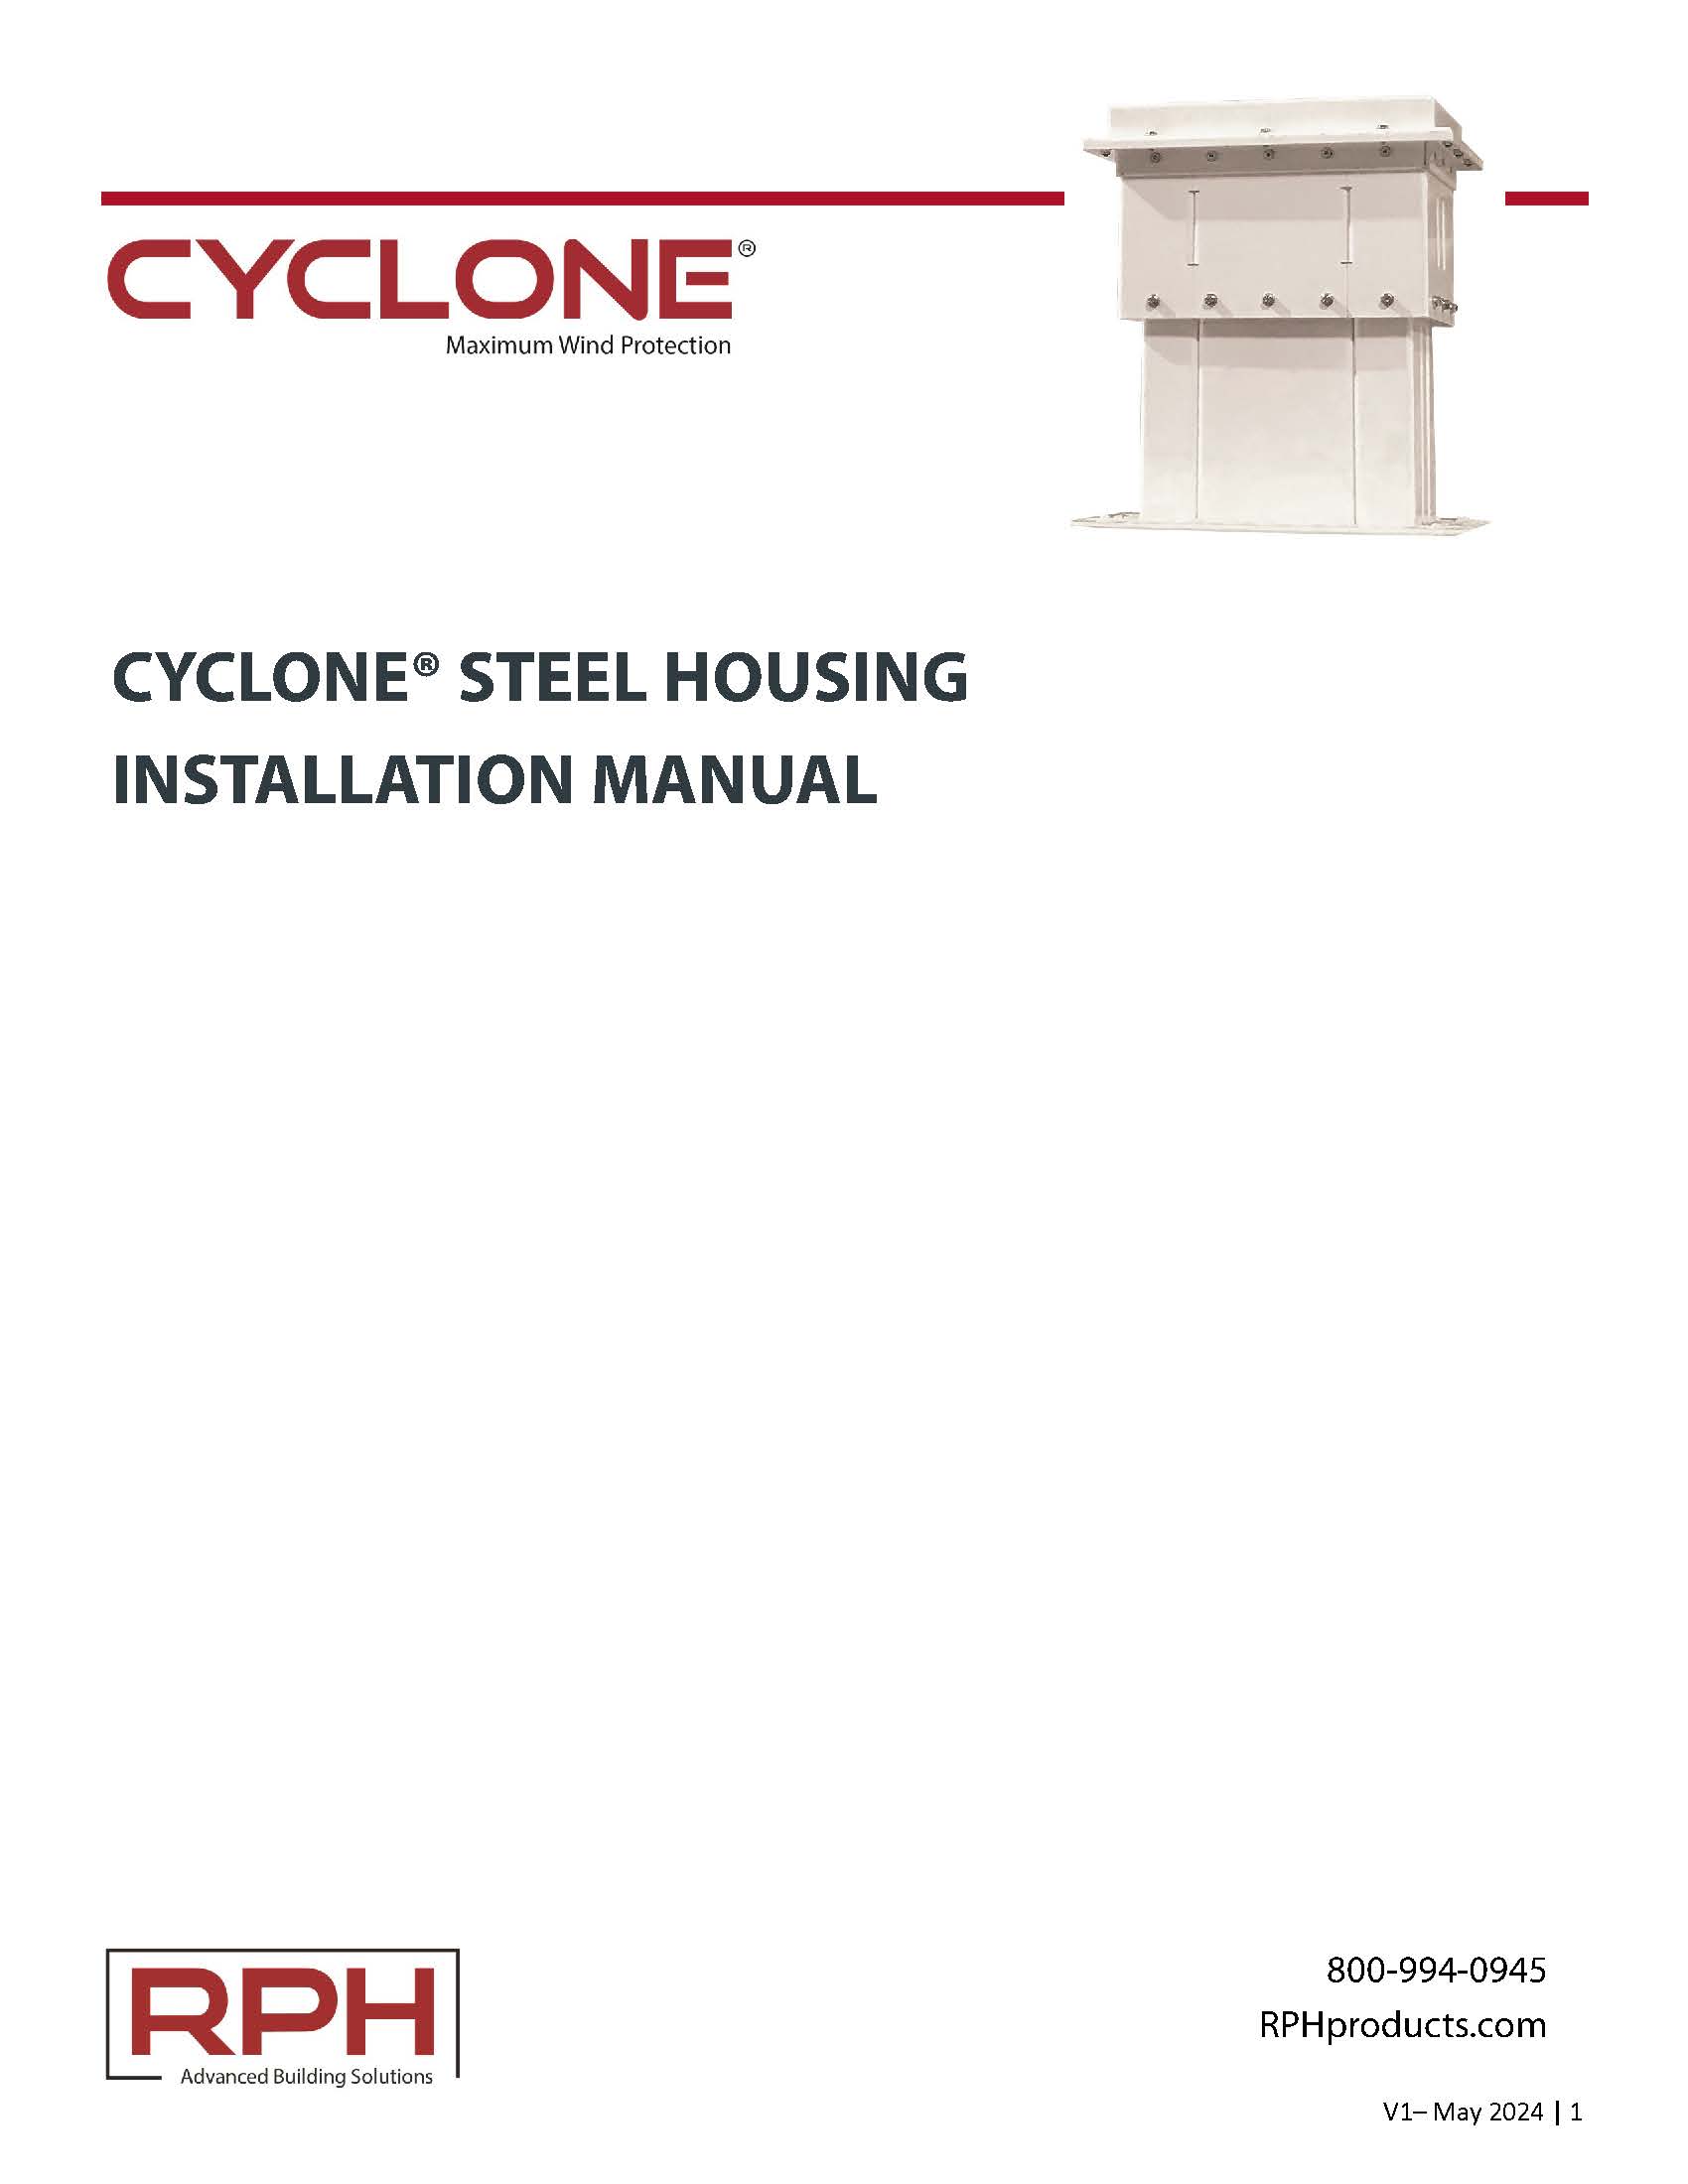 CYCLONE STEEL HOUSING INSTALLATION MANUAL_Page_01